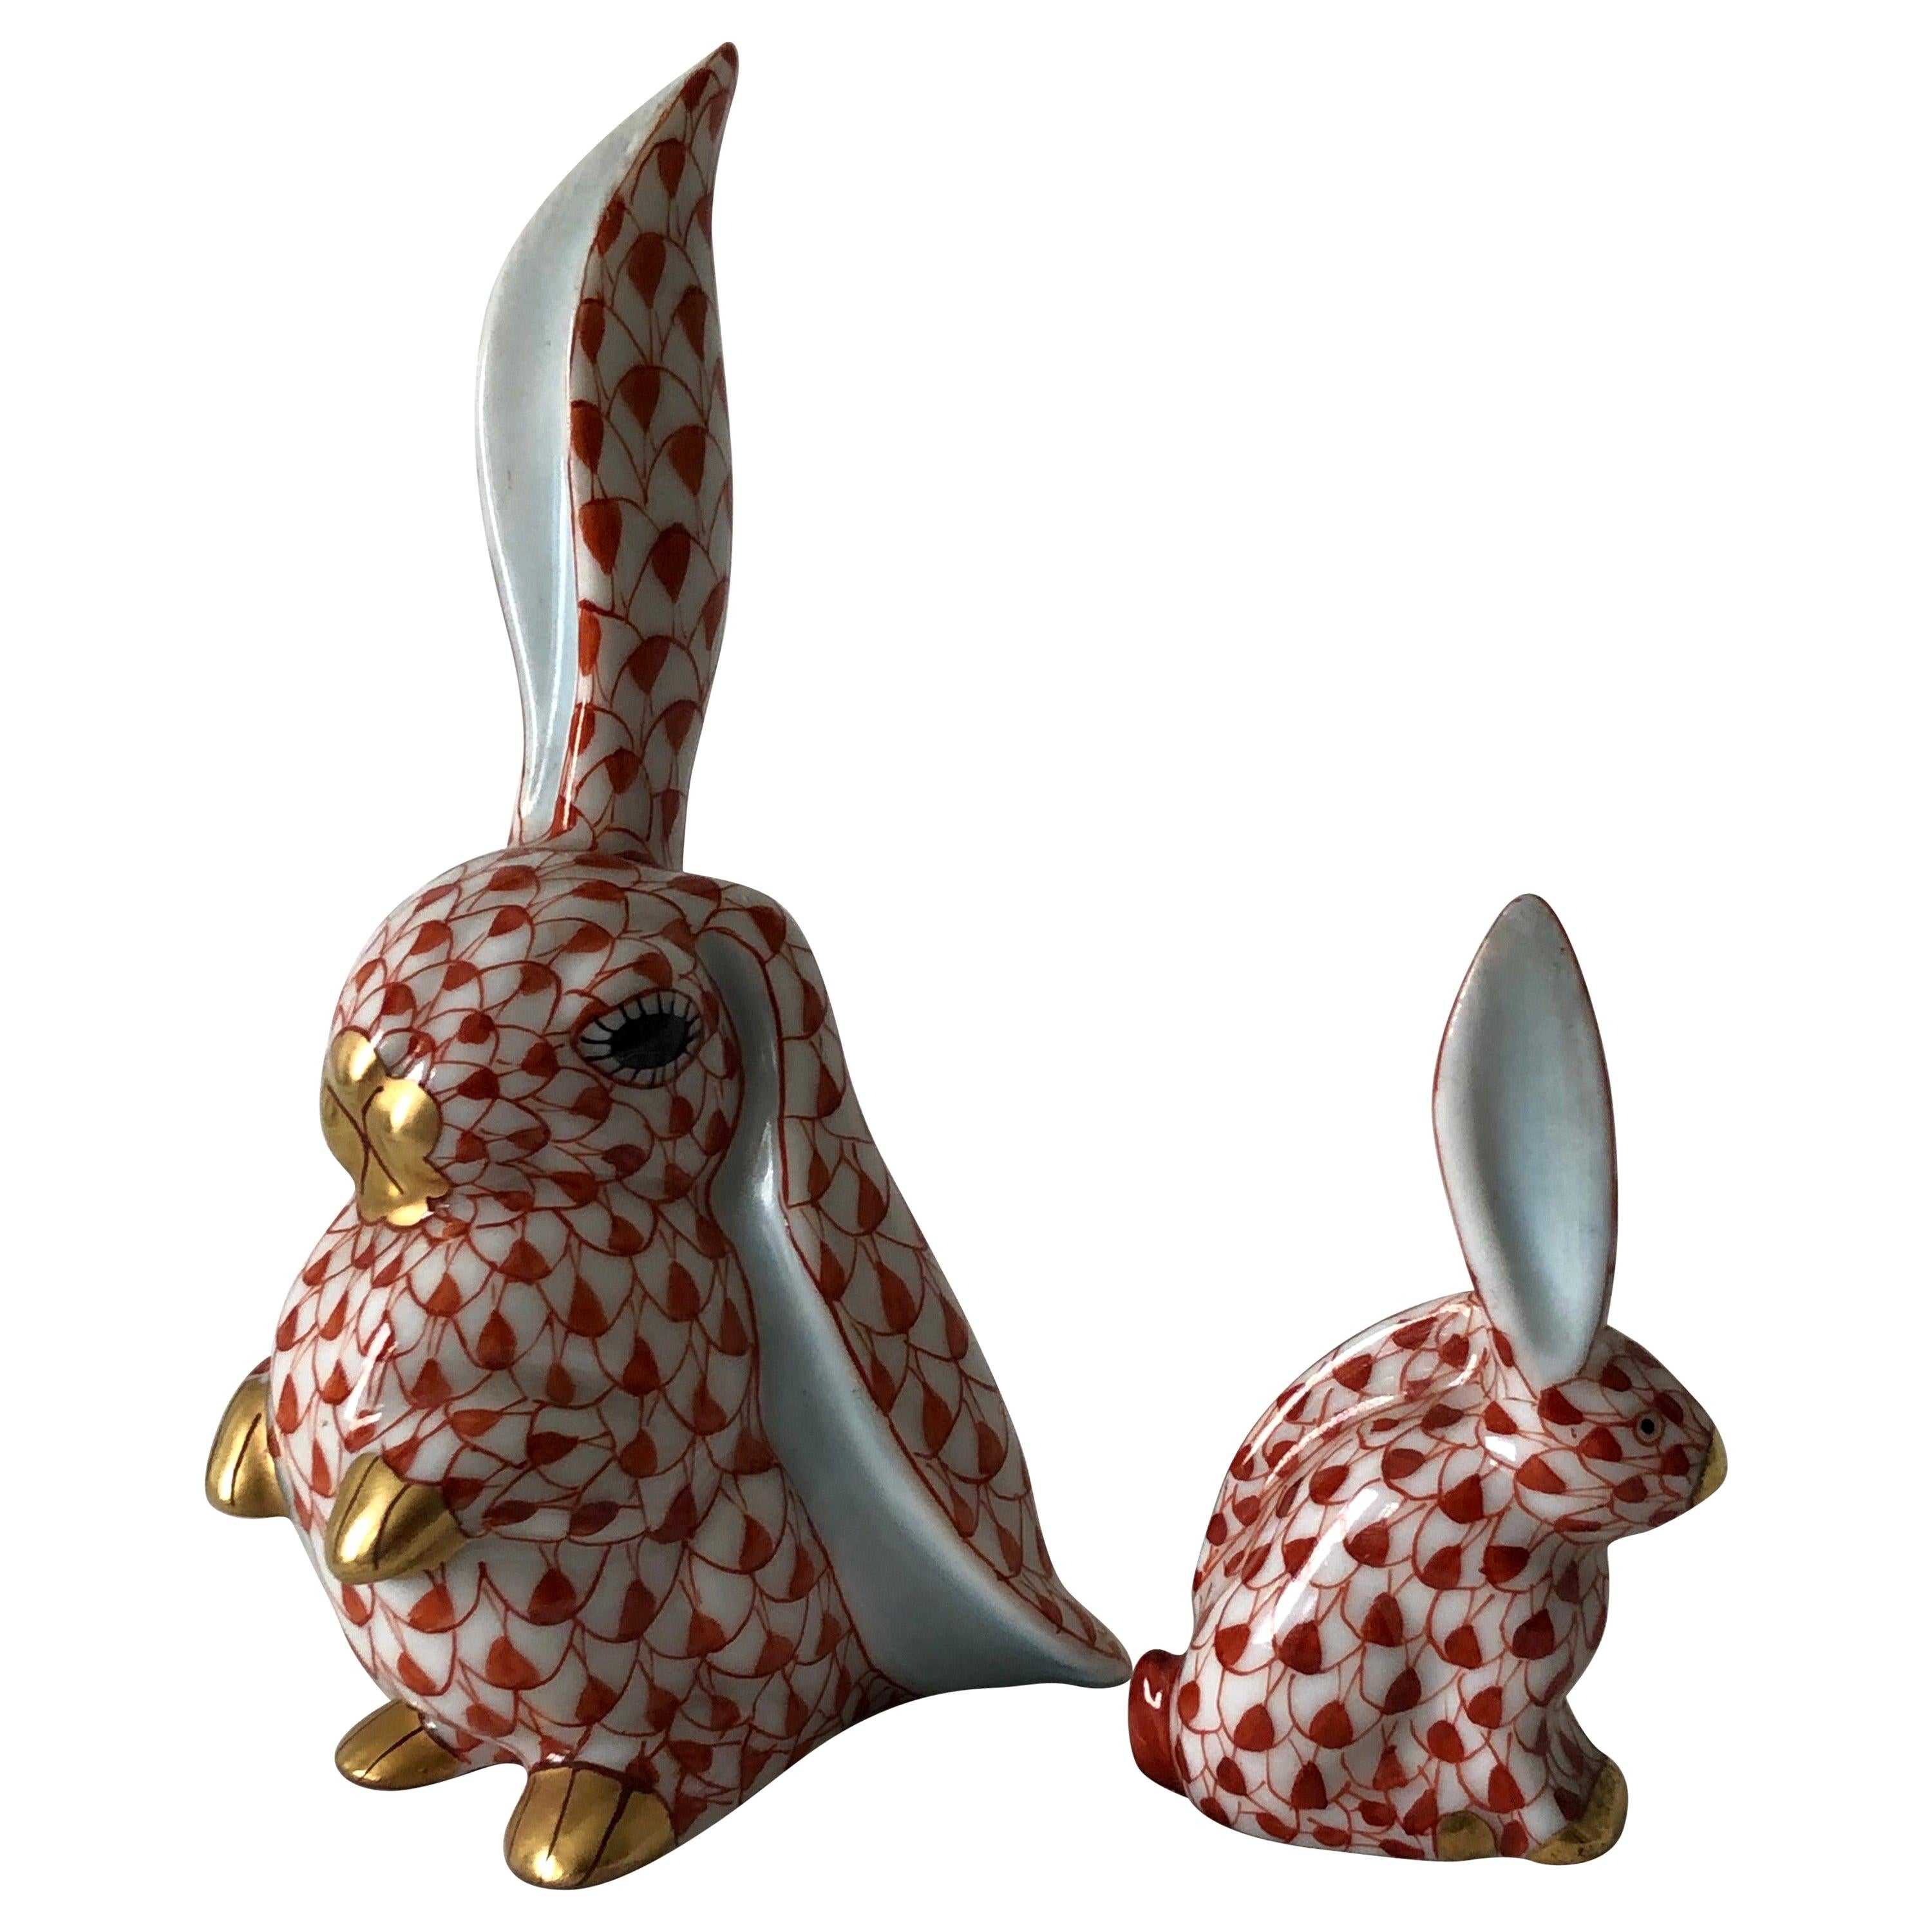 Two Red Herend Porcelain Rabbits One Ear Up